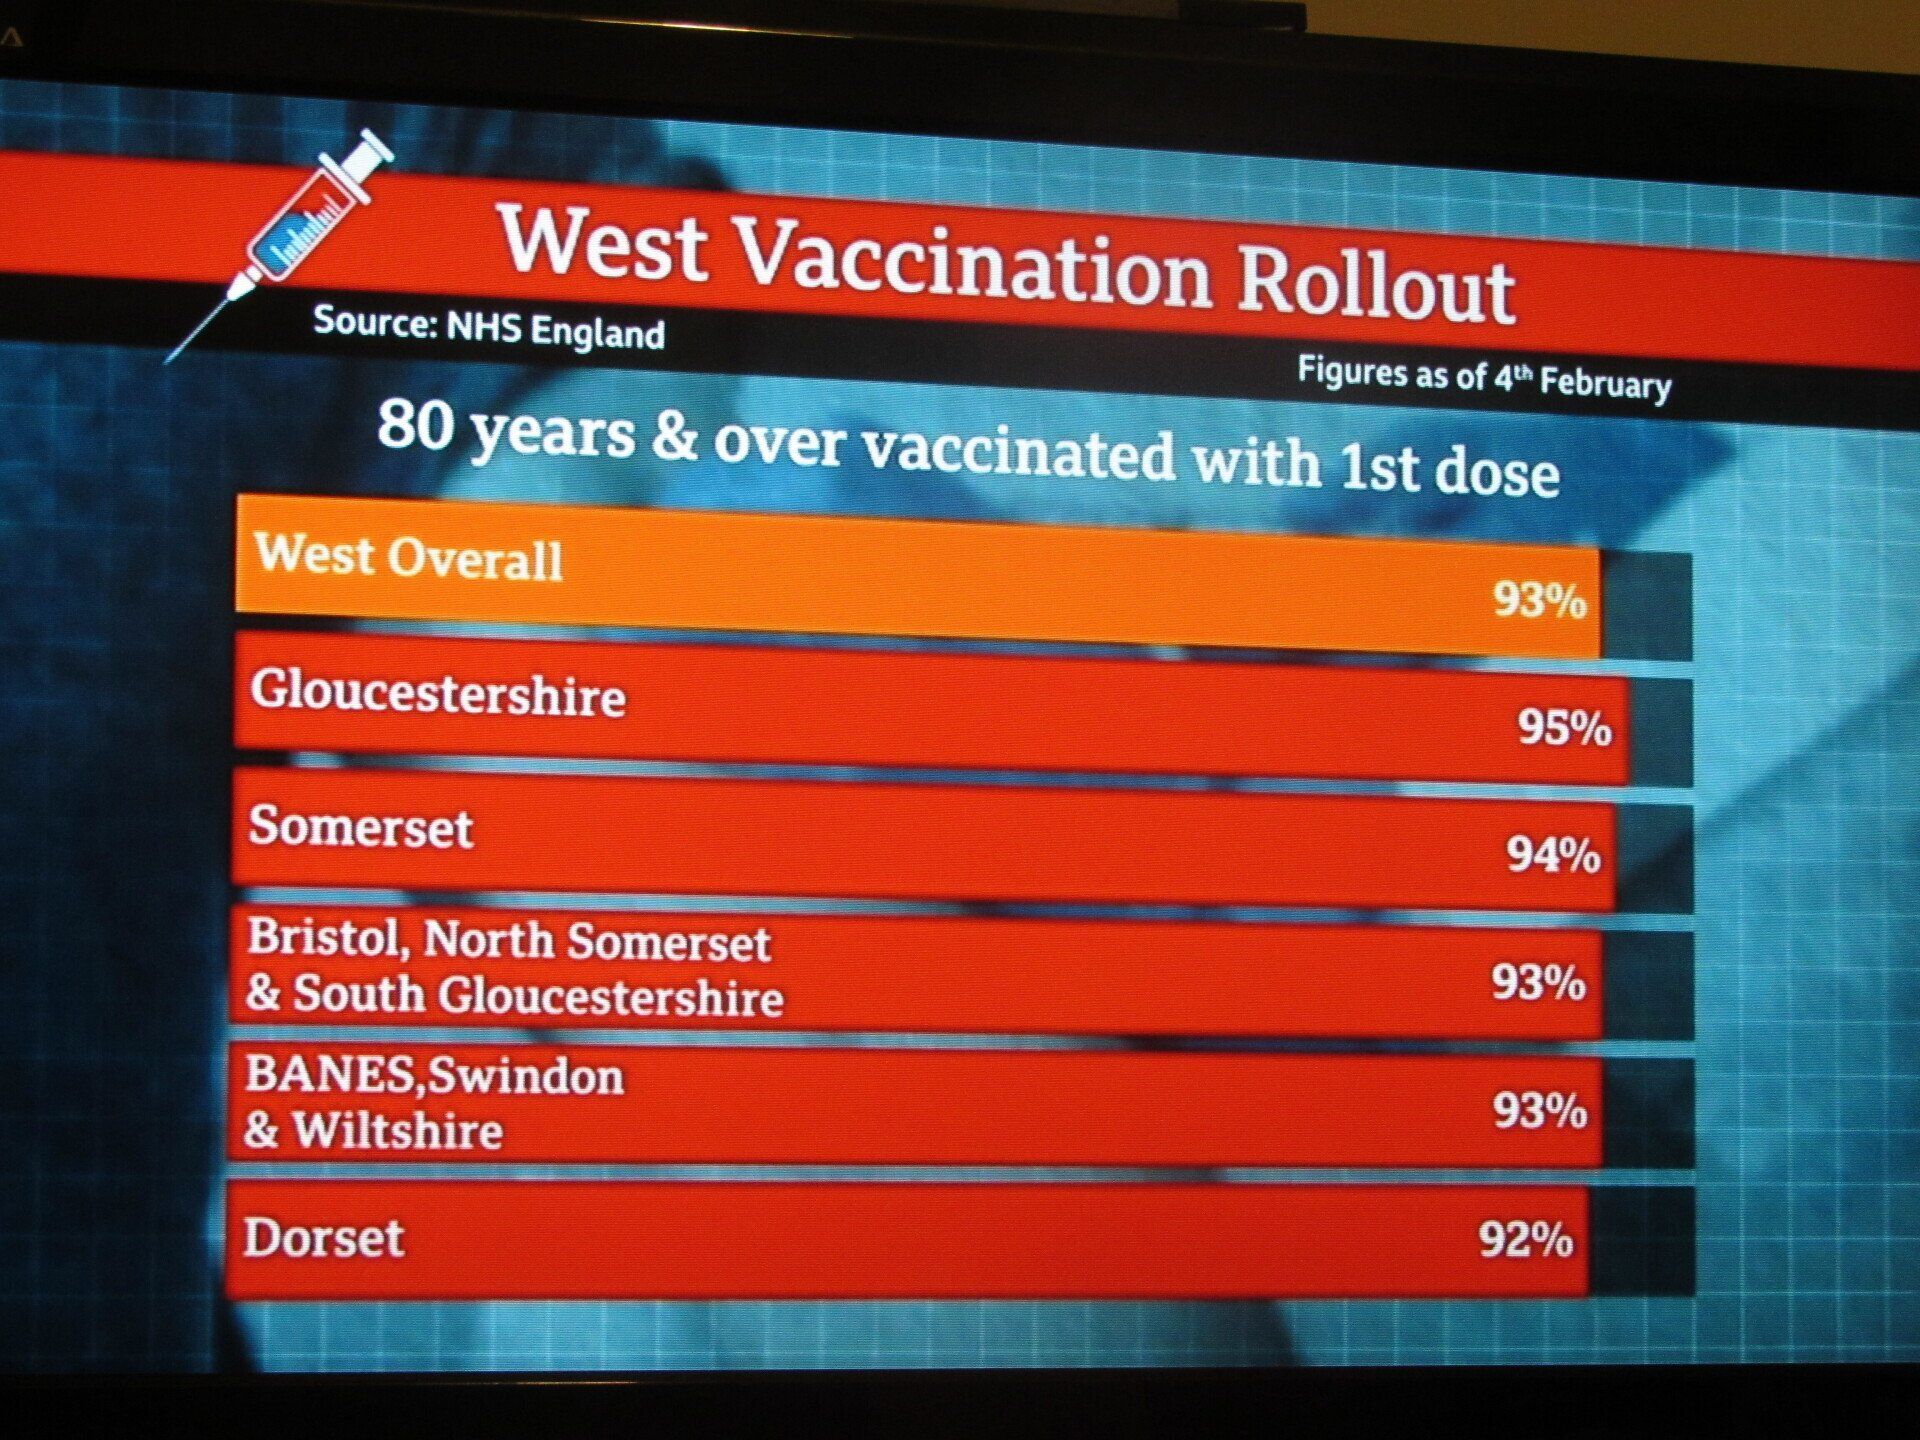 Points West vaccination rollout Aug 2020